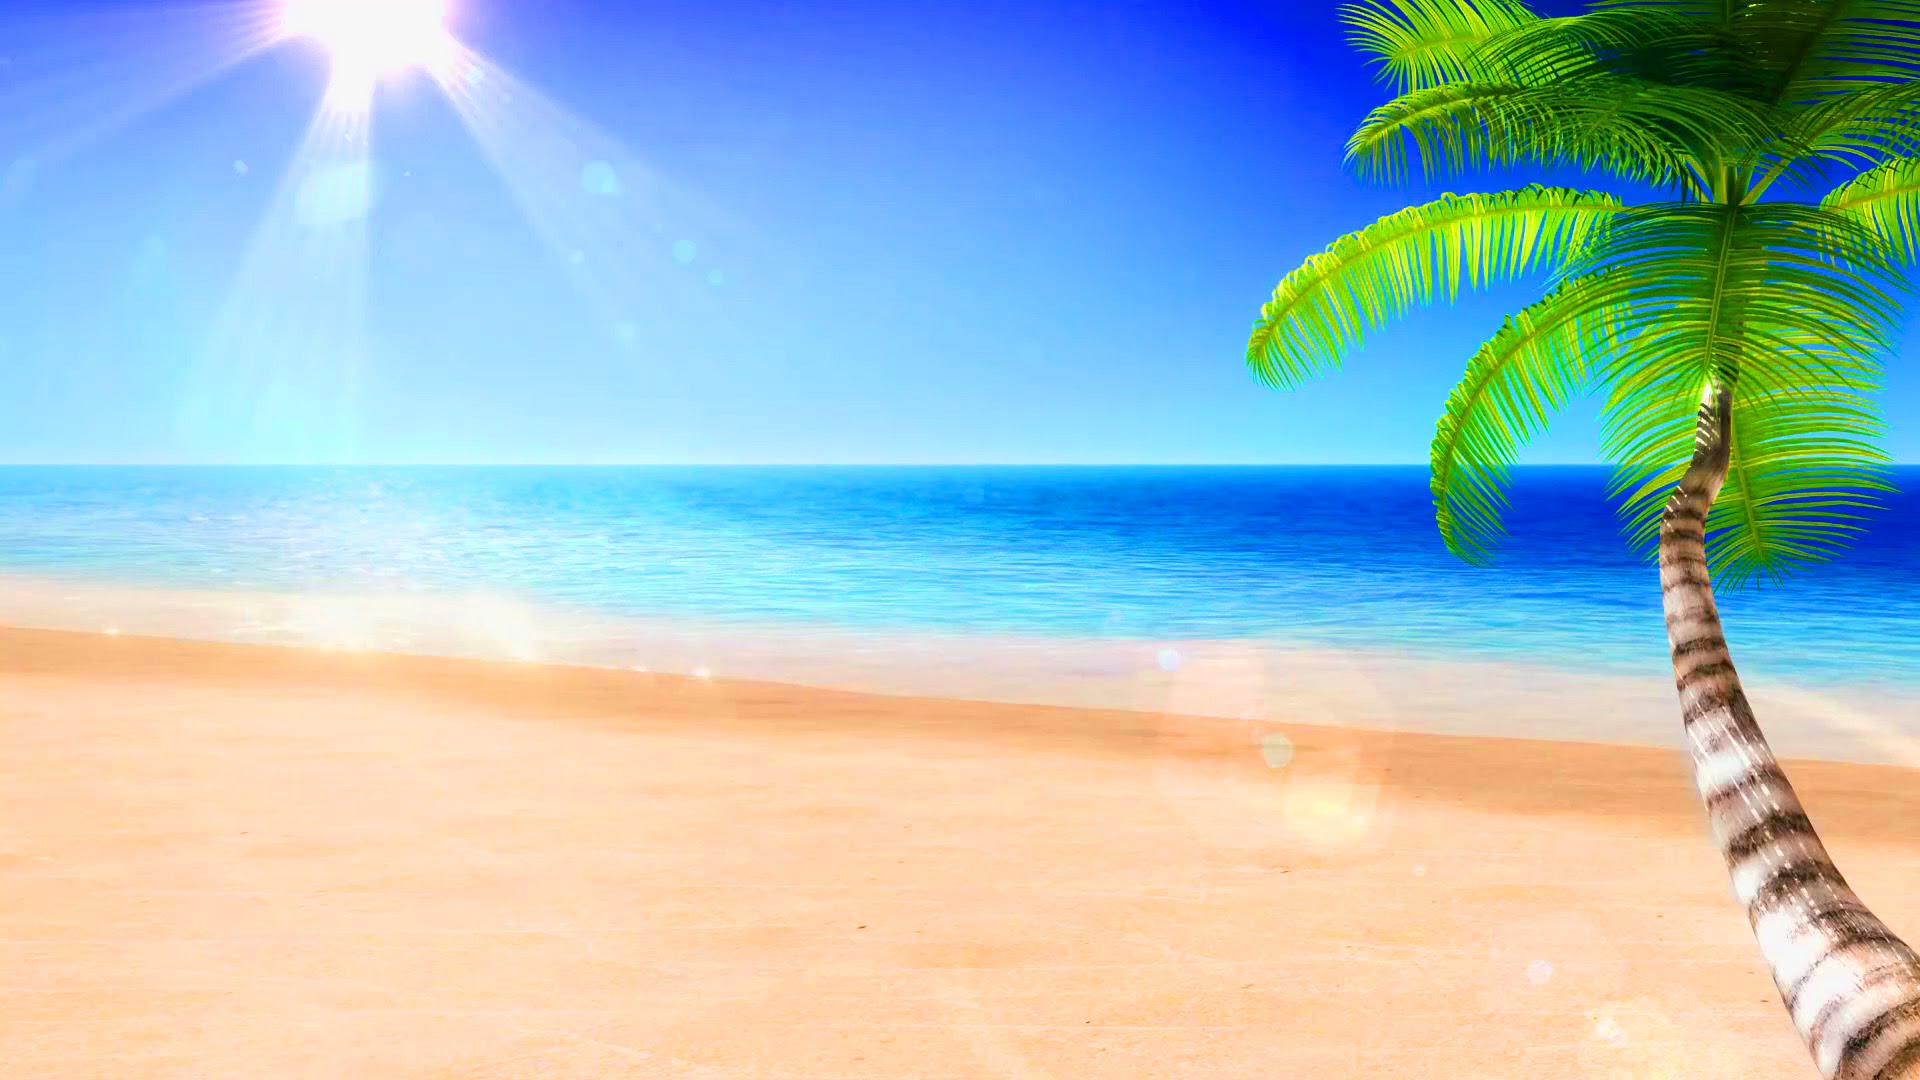 Tropical Beach Wallpaper Pictures Image